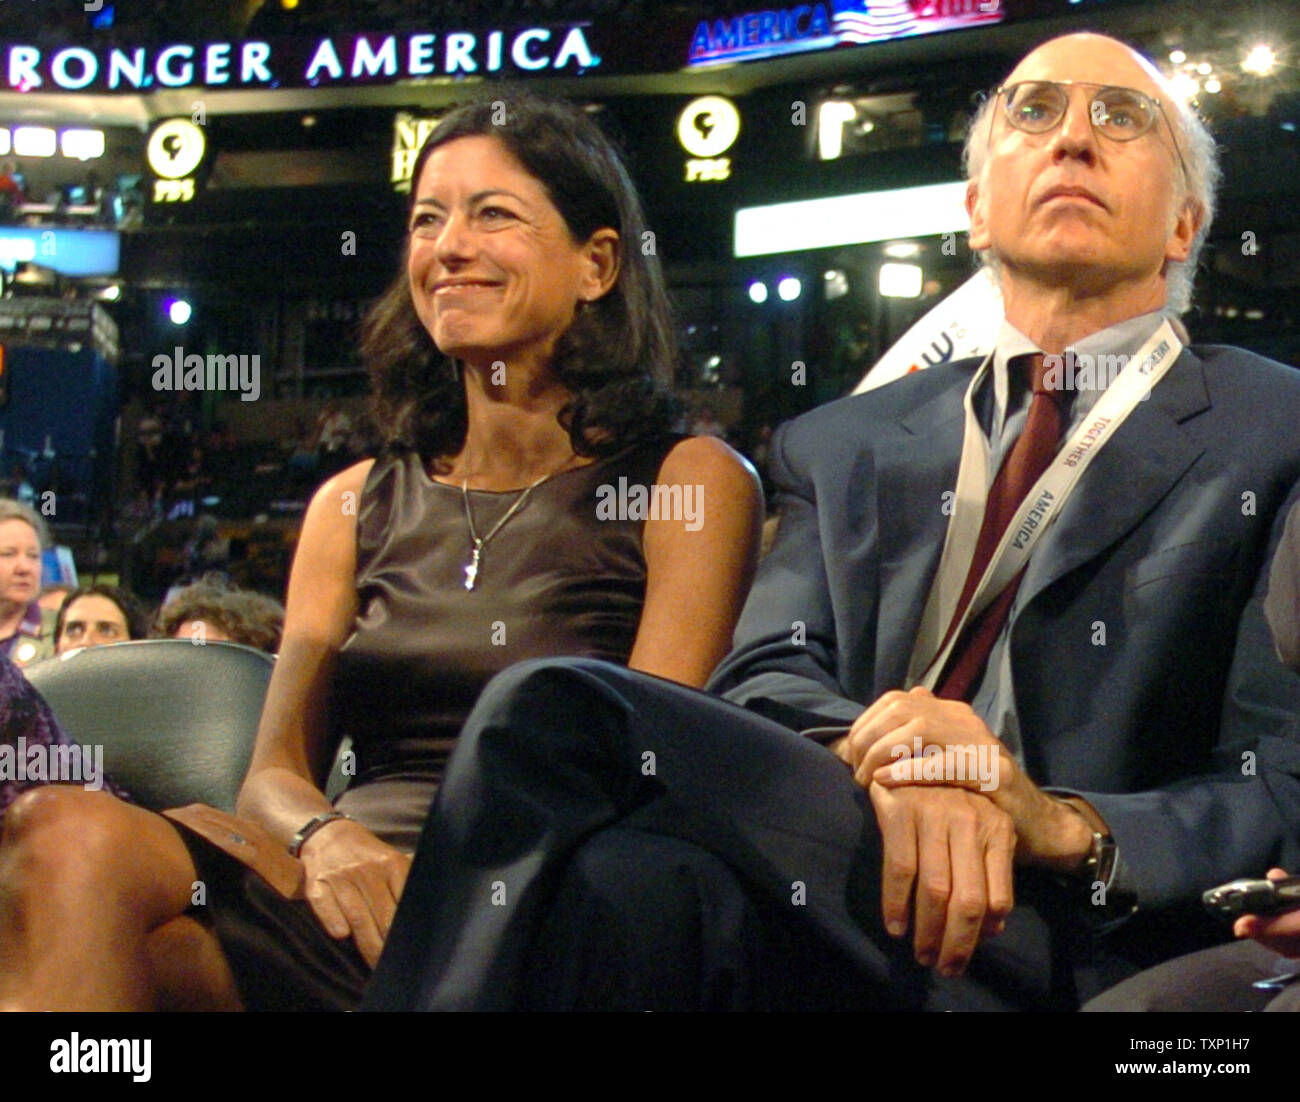 Actor Larry David, of the TV program 'Curb Your Enthusiasm,' and his wife Laurie attend day three of the Democratic National Convention at the FleetCenter in Boston on July 28, 2004.    (UPI Photo/Greg Whitesell) Stock Photo